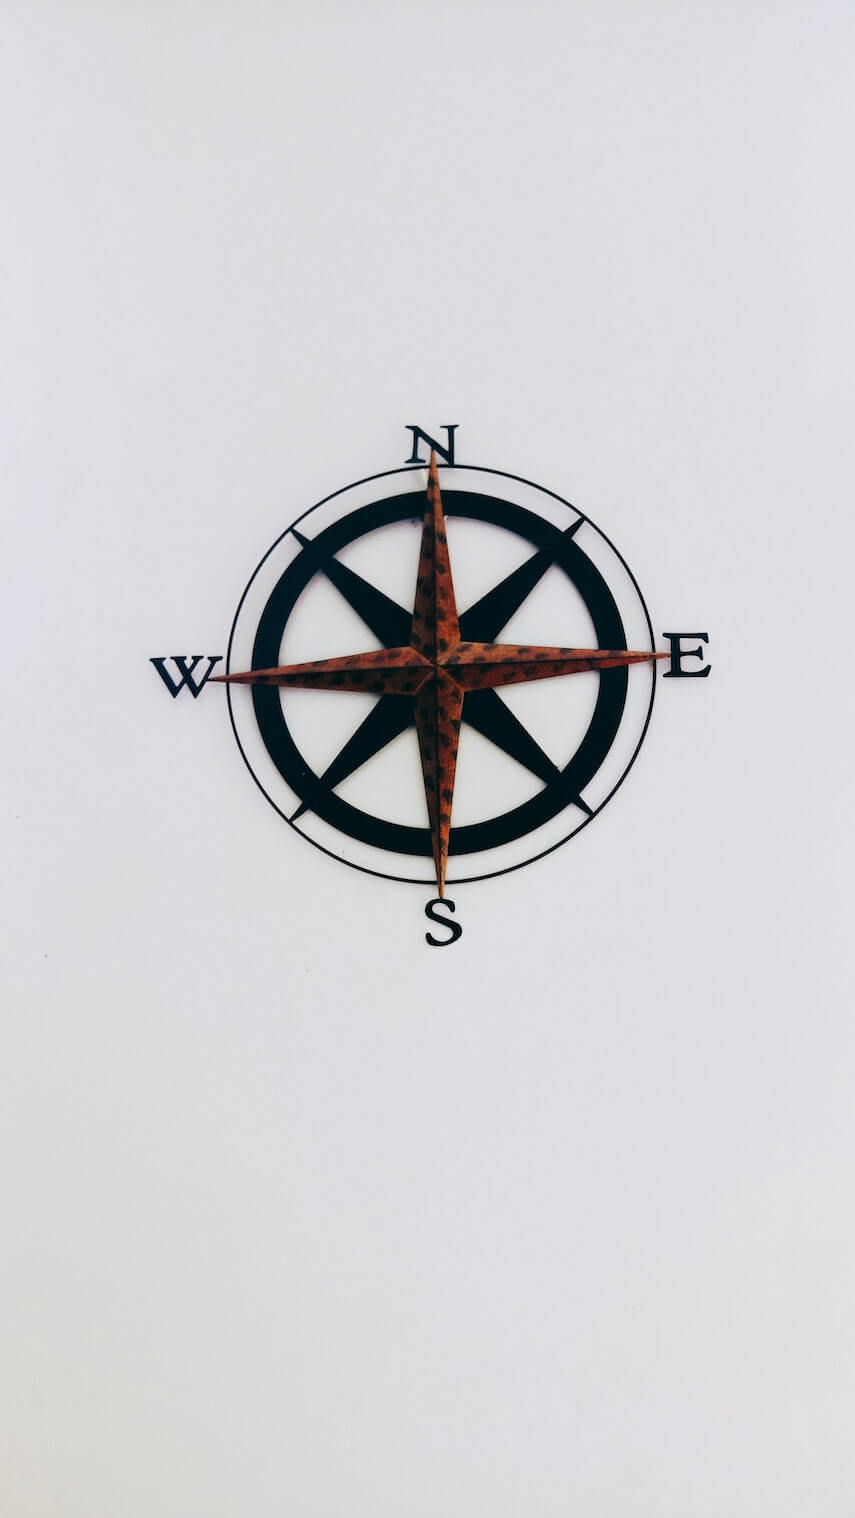 Black compass with 4 star points against white background